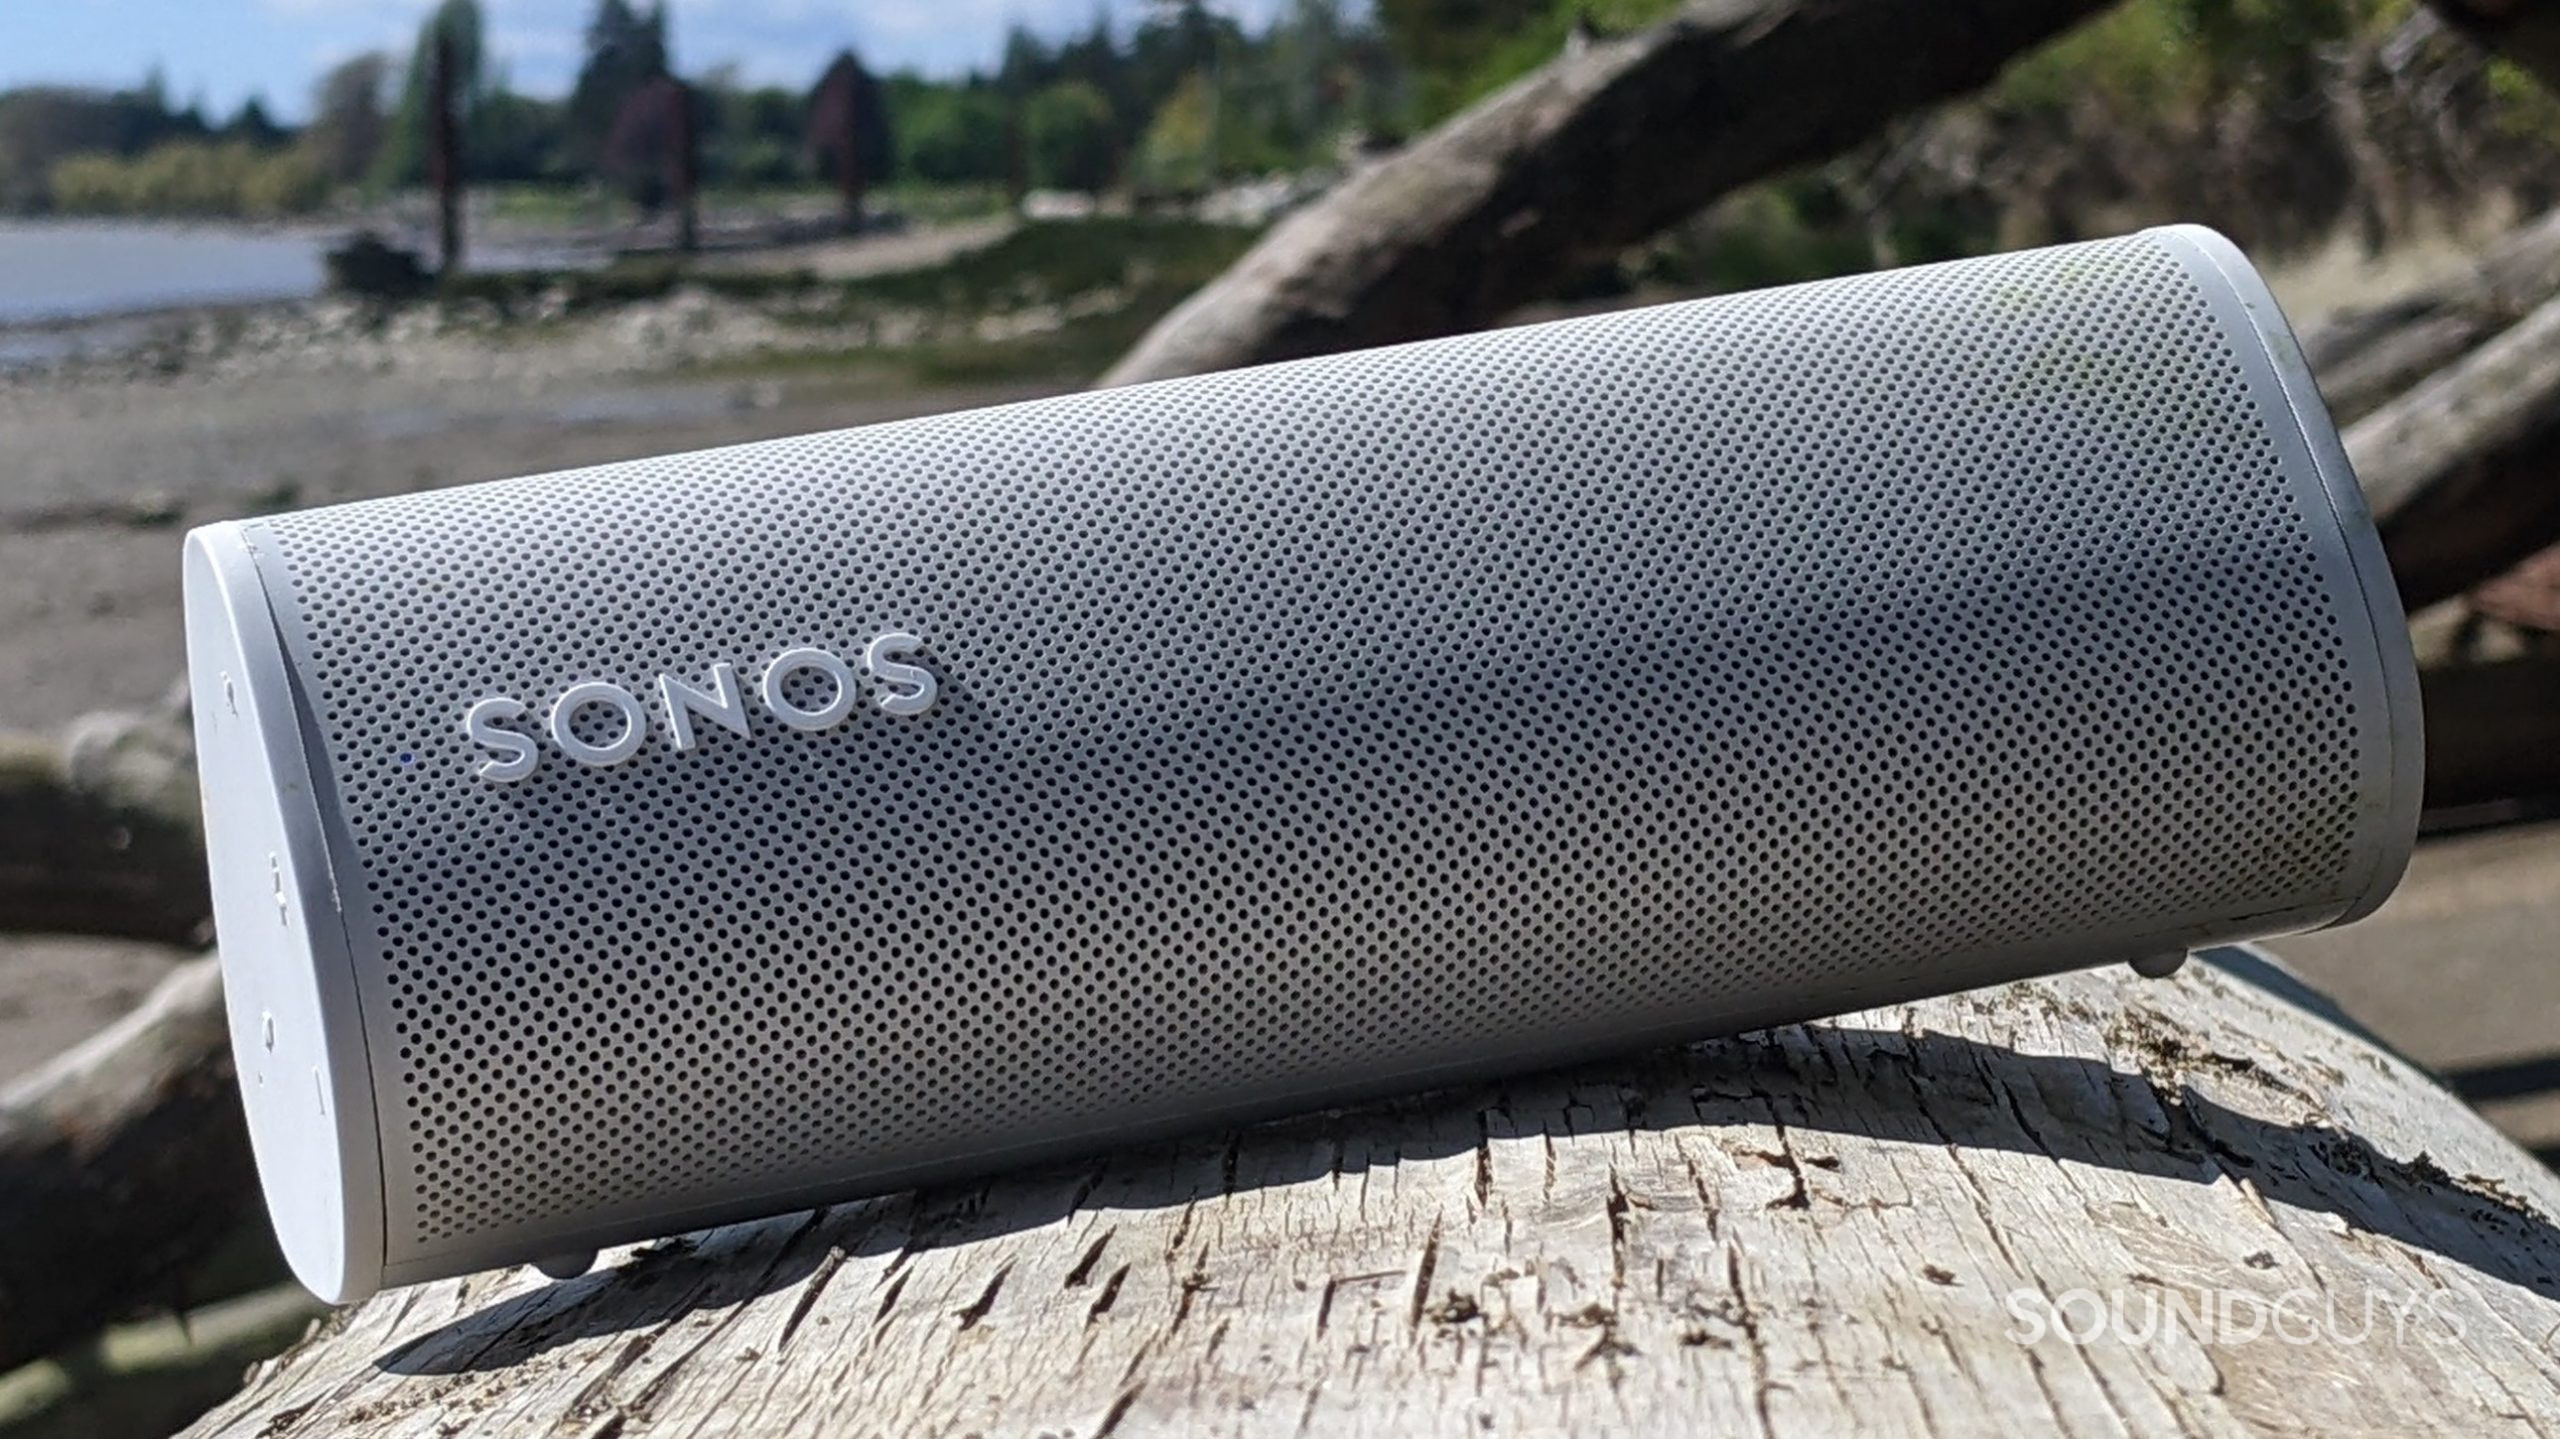 A white Sonos Roam speaker sitting at a slight angle on a log on a beach in front of a fallen tree and a body of water along with some trees in the distance.